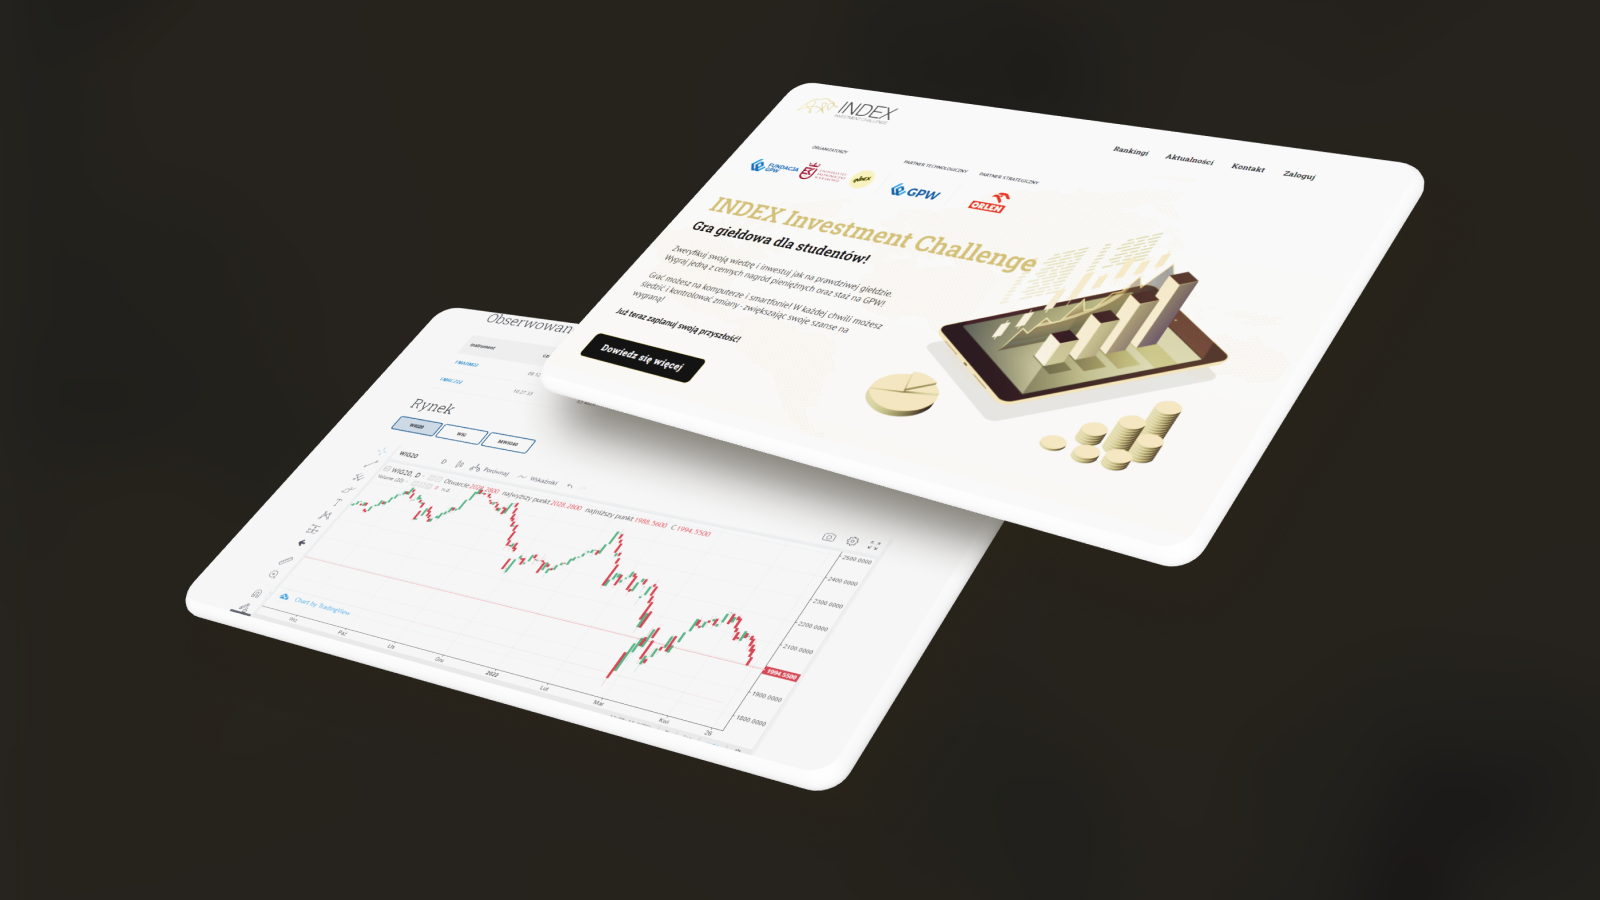 two levitating screens showing a portion of the platform with a stock market game, the home page and a stock market chart